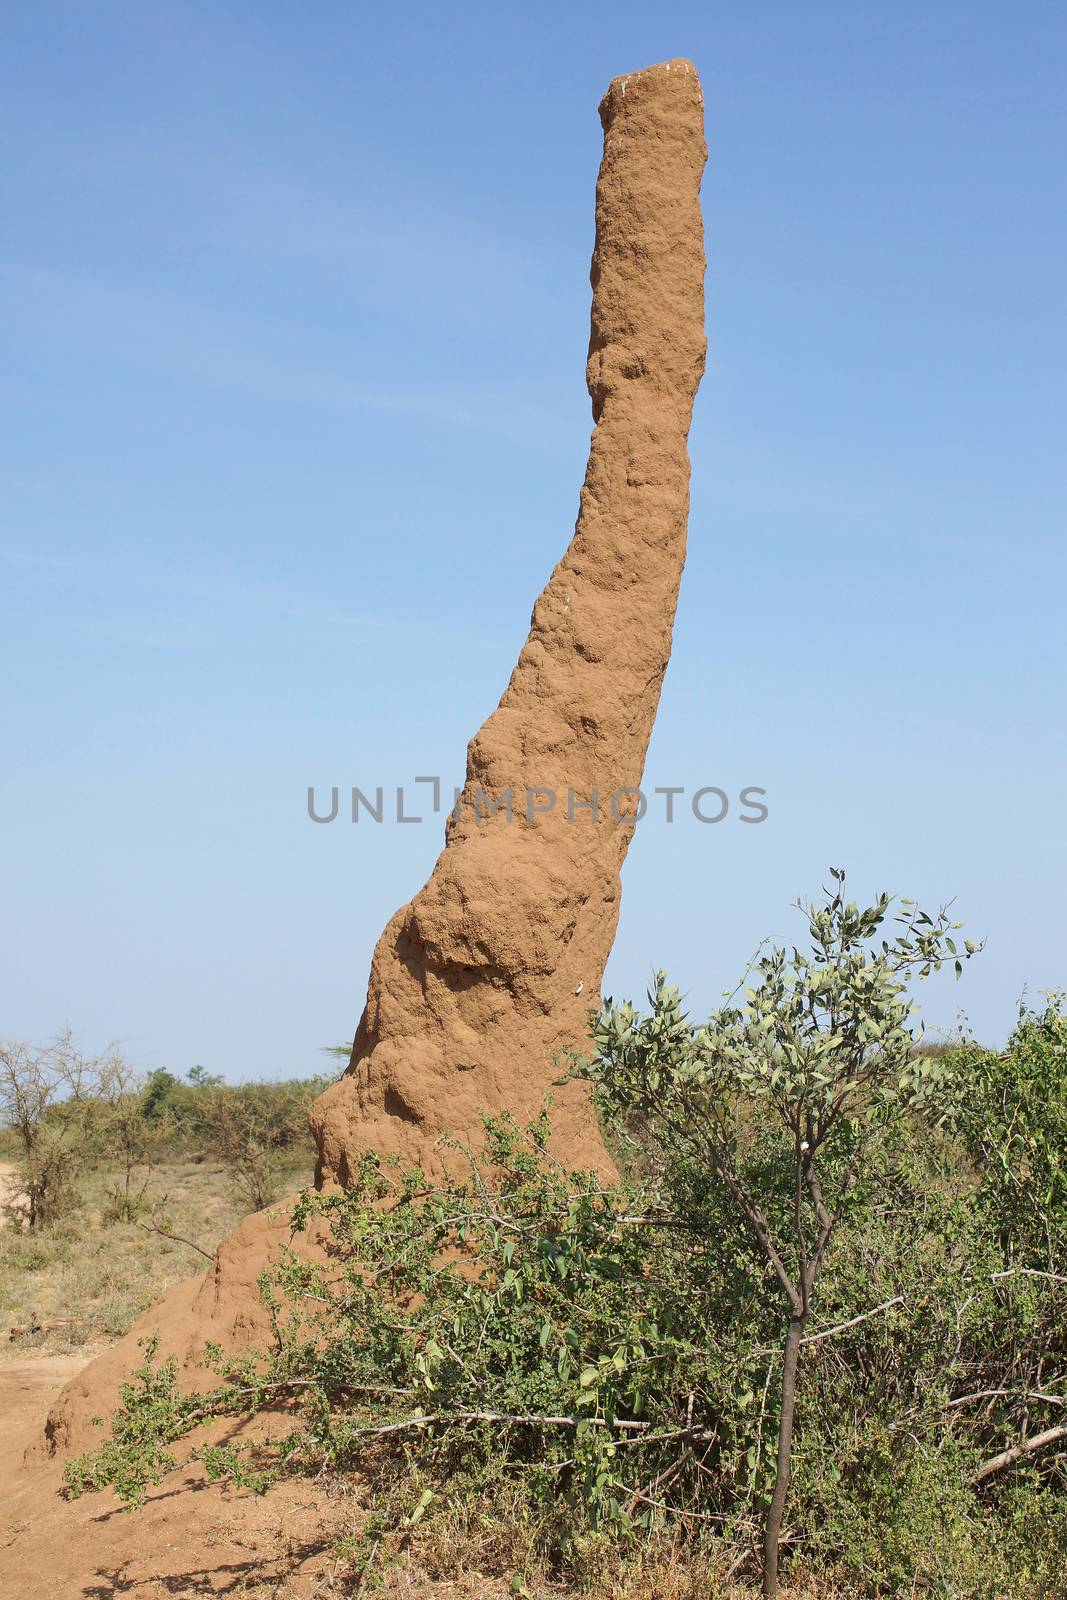 Termite nest in the south of Ethiopia, Africa